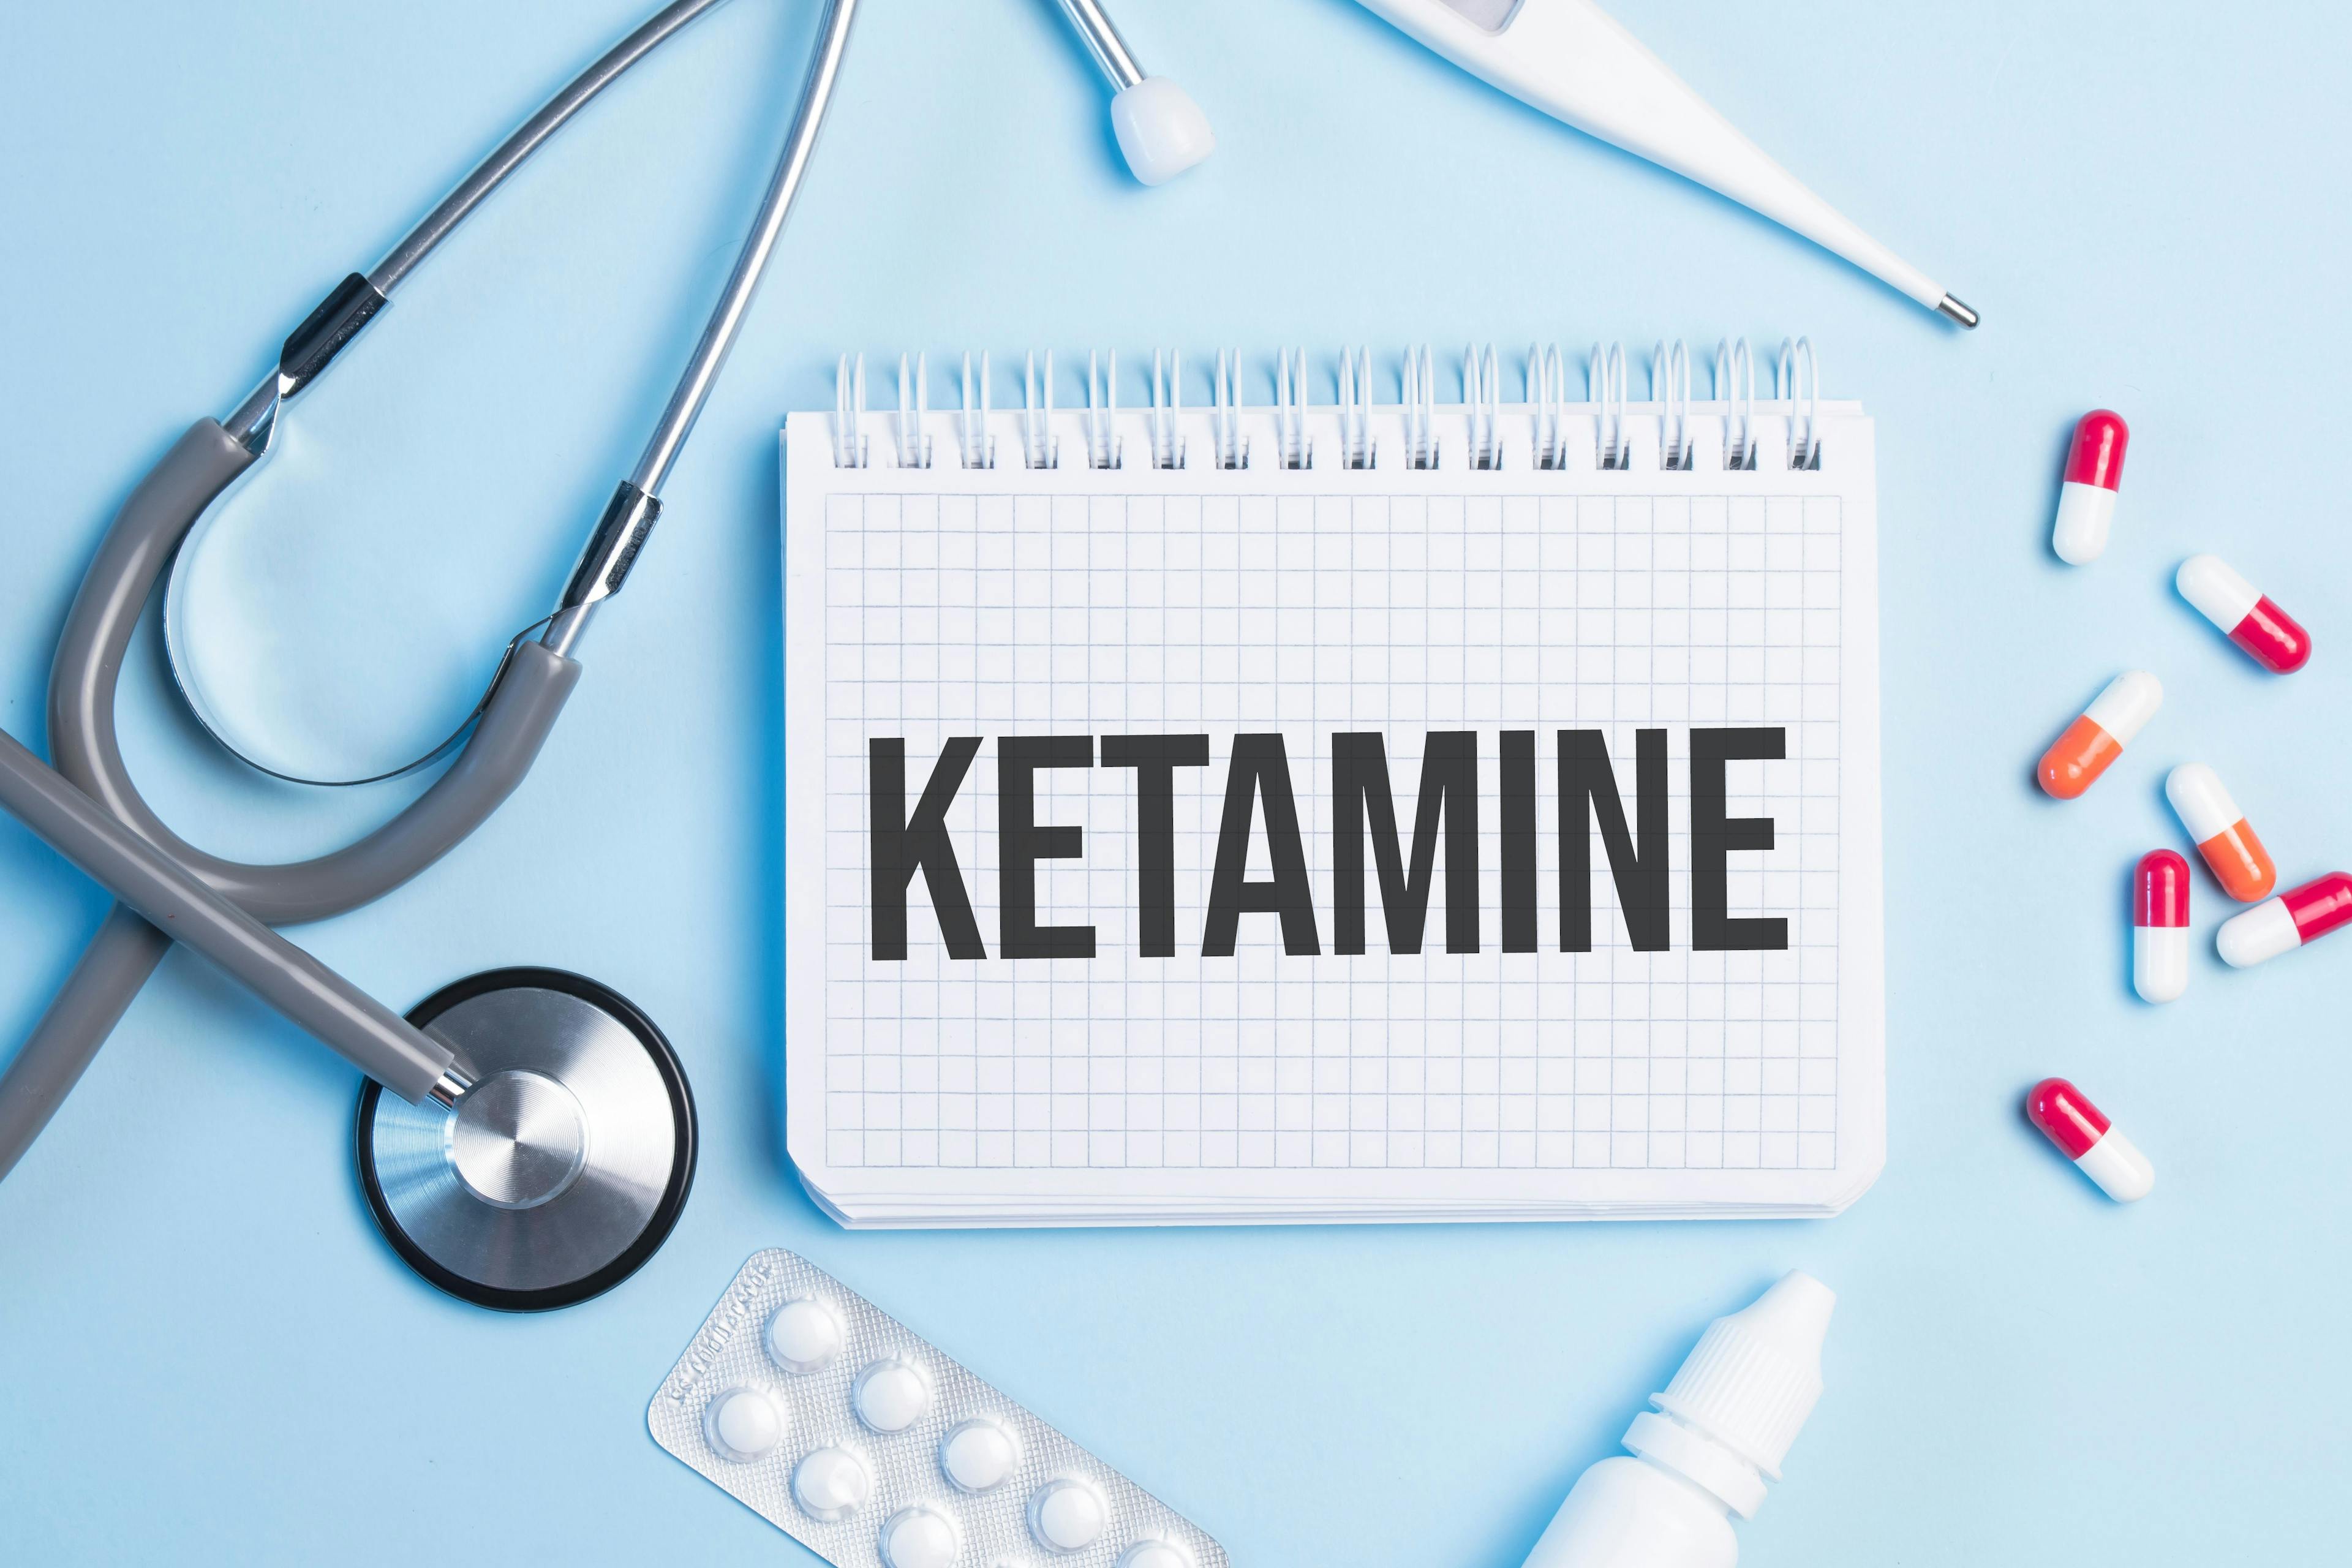 The Psychiatric Times Editor-in-Chief discusses the clinical uses and casual prescribing of ketamine for the treatment of psychiatric disorders.